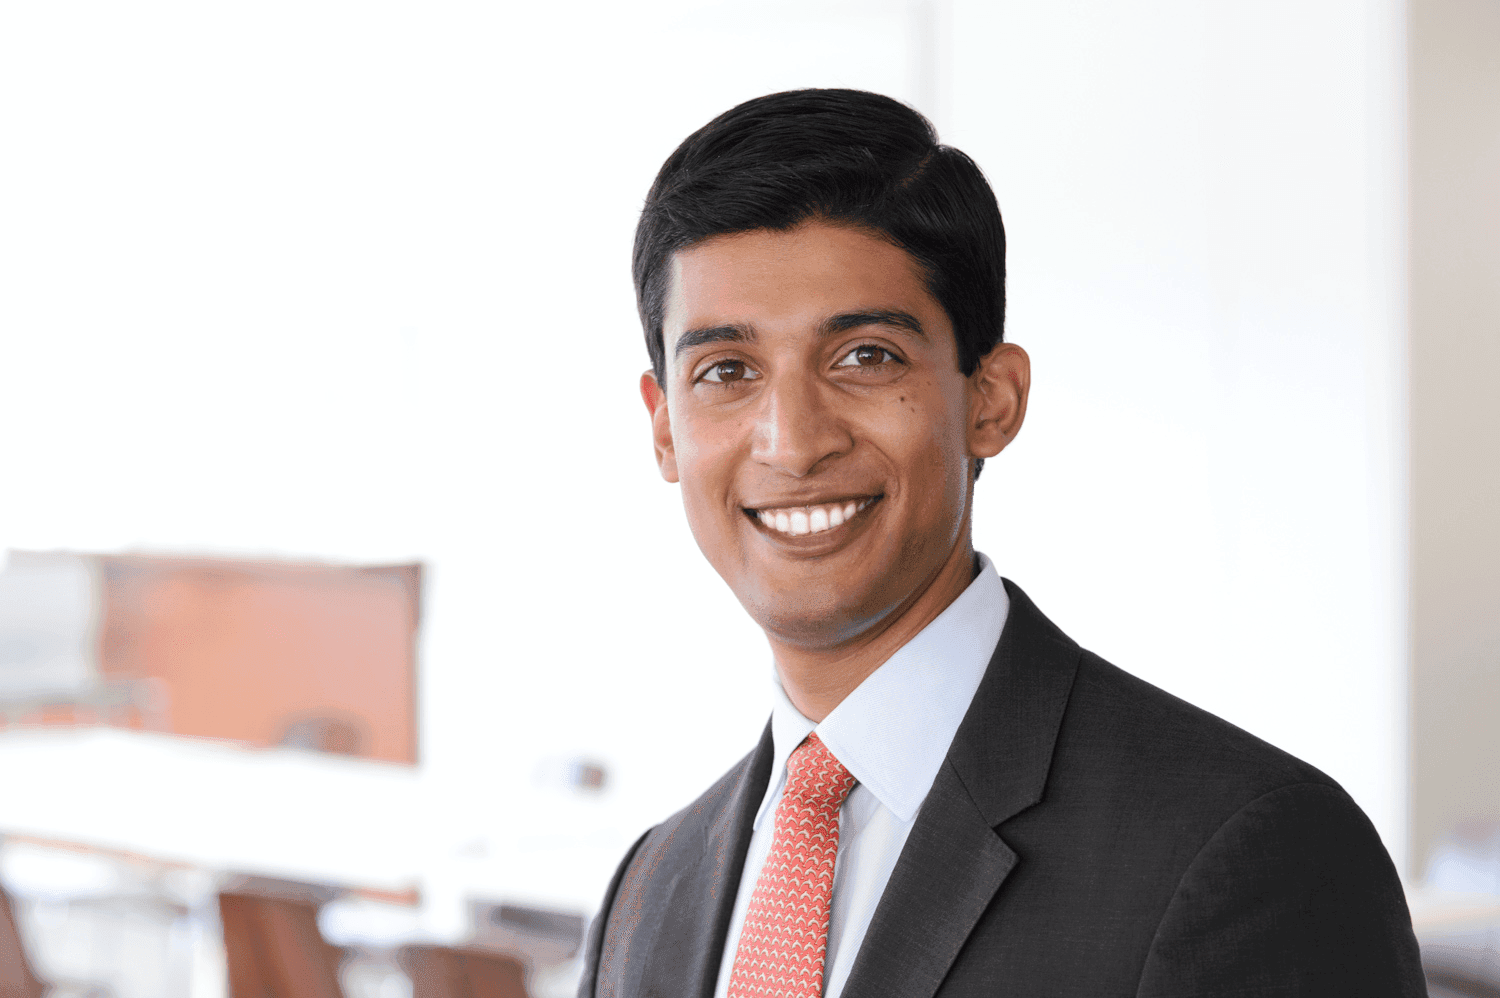 Product: Orsted Announces Dr Varun Sivaram as Group Senior Vice President for Strategy and Innovation